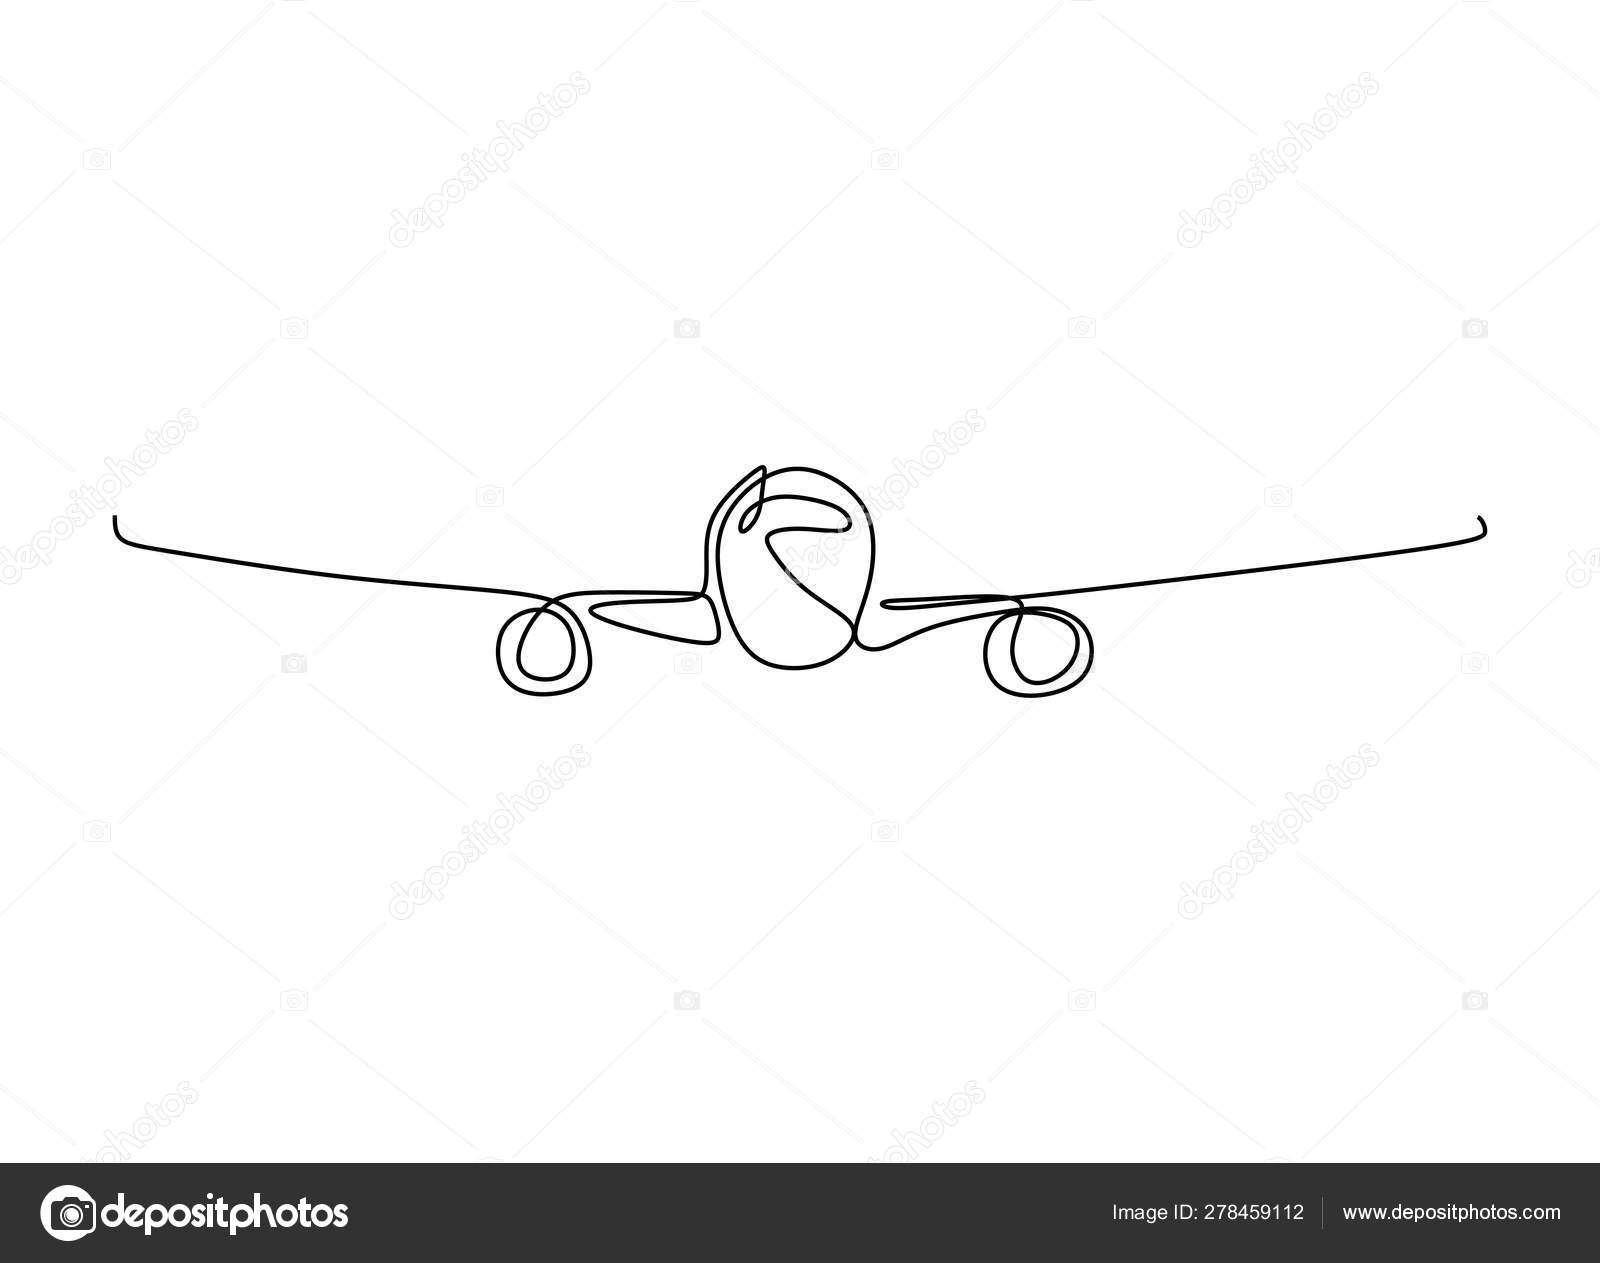 One Line Drawing Of Airplane Flying On The Sky On White Background Vector Image By C Ngupakarti Vector Stock 278459112